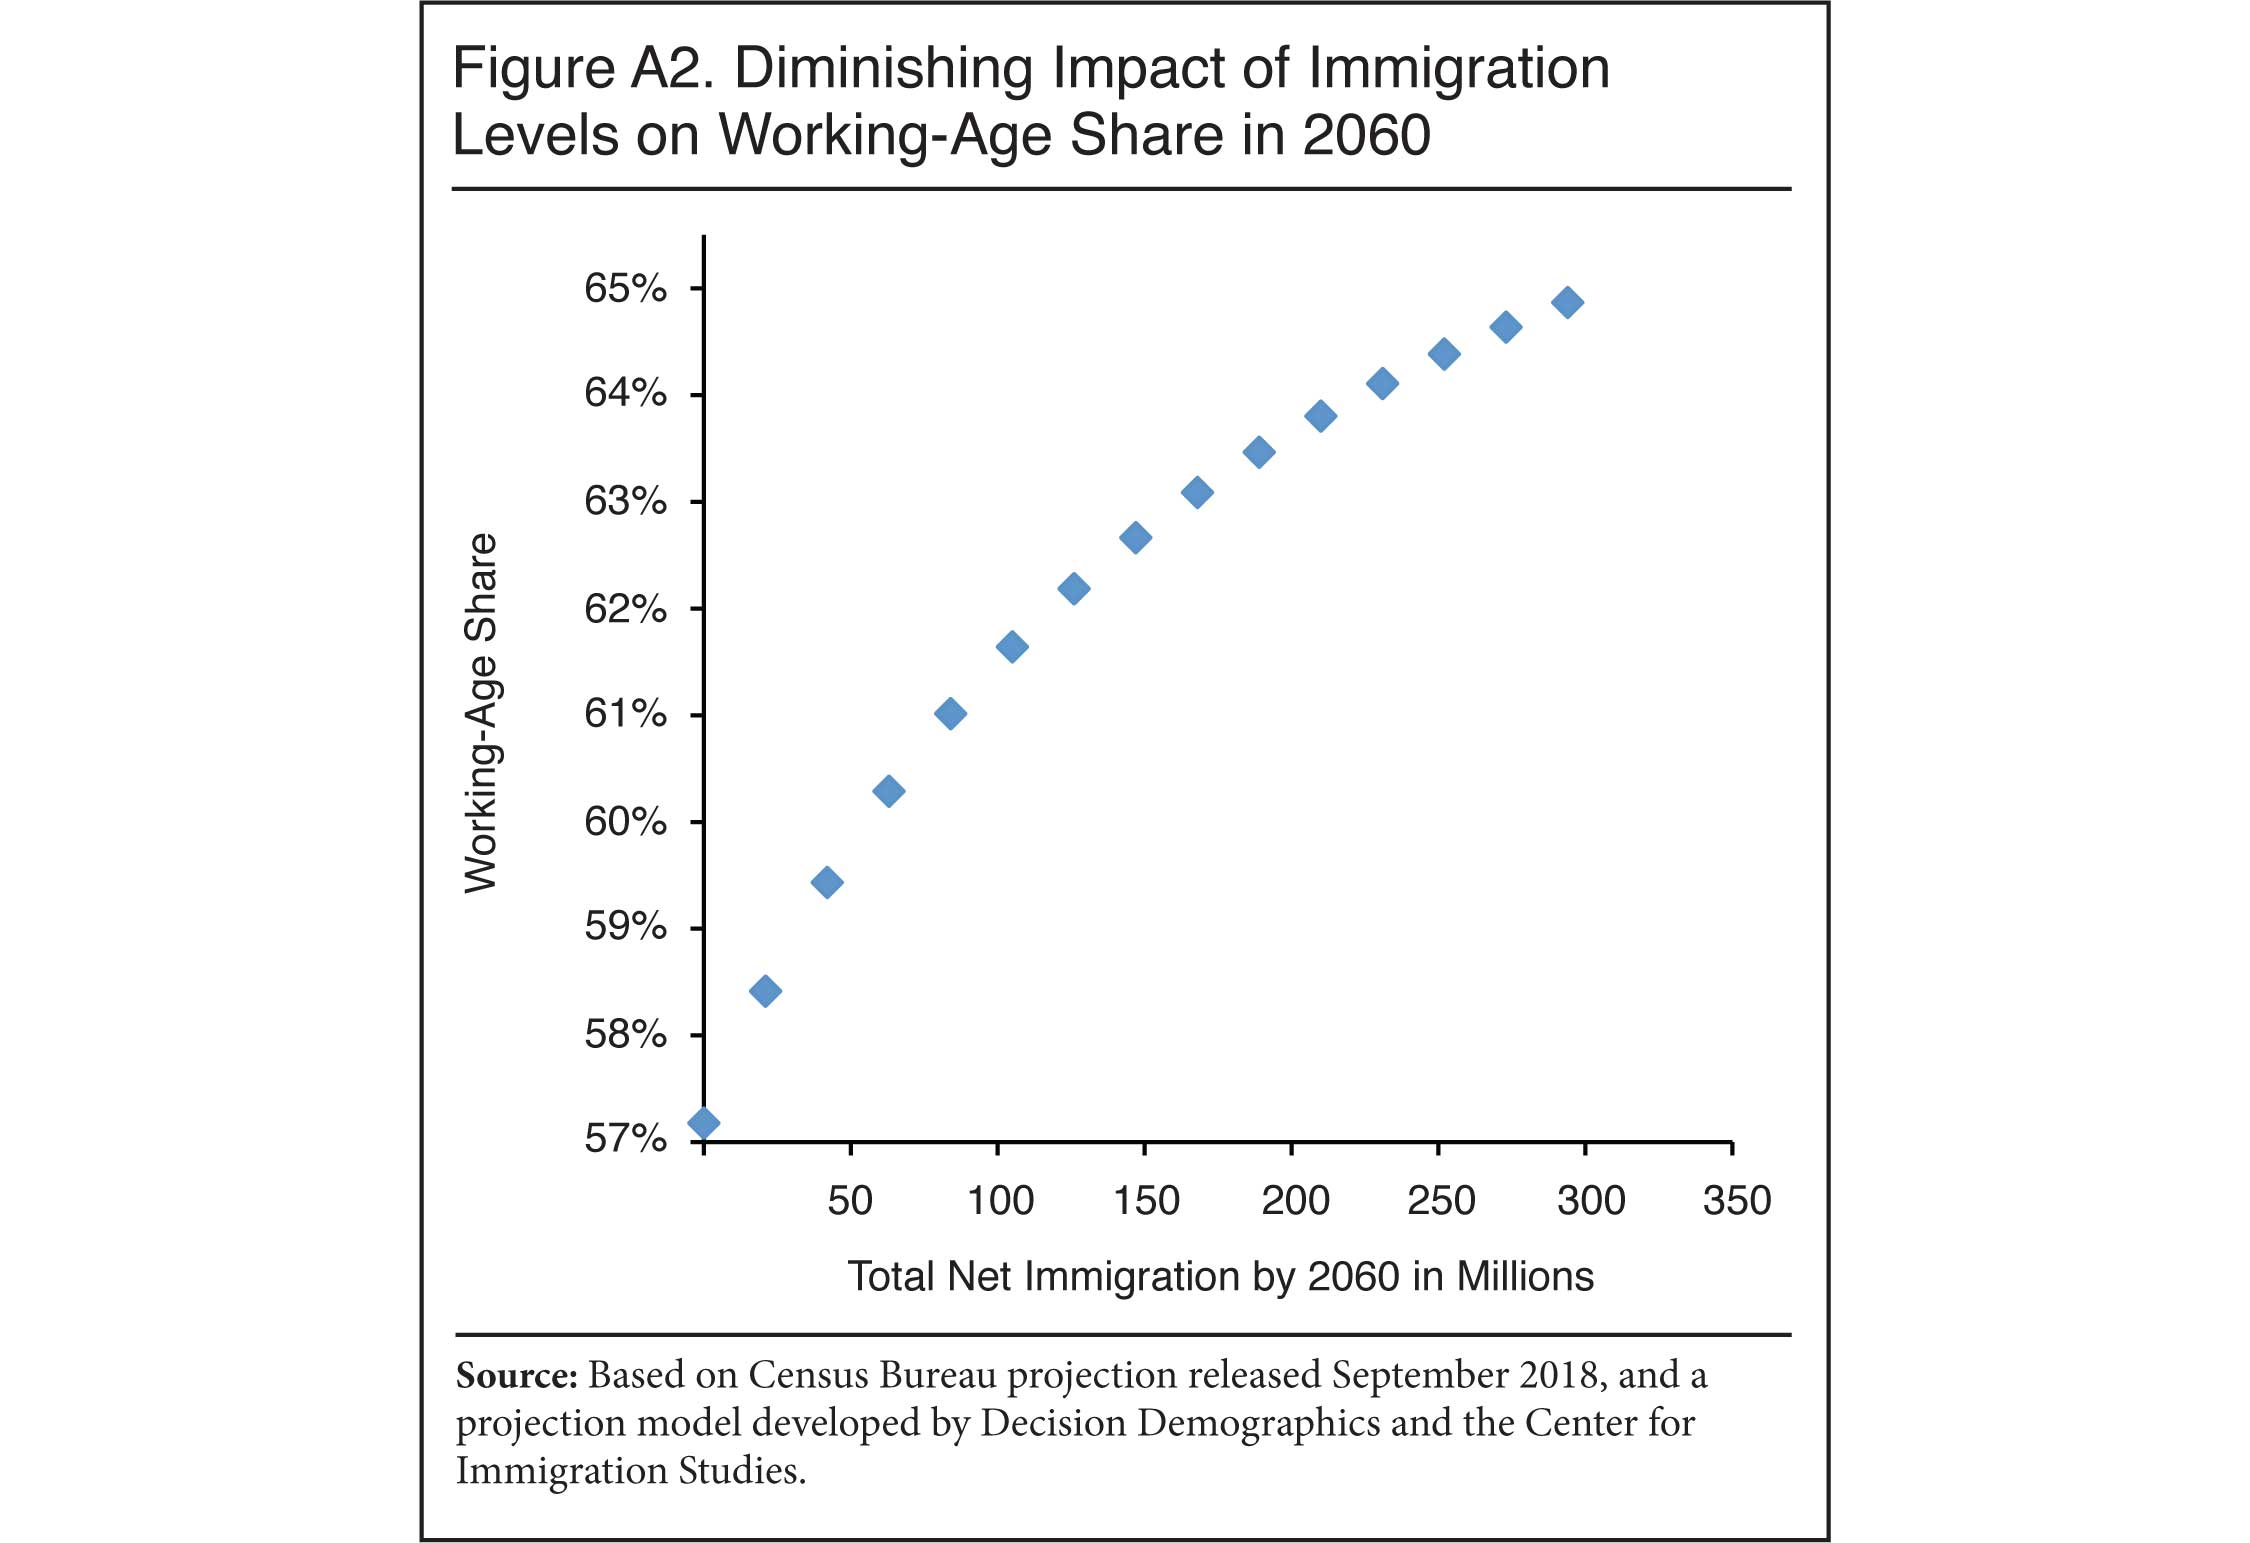 Graph: Diminishing Impact of Immigration Levels on Working Age Share in 2060